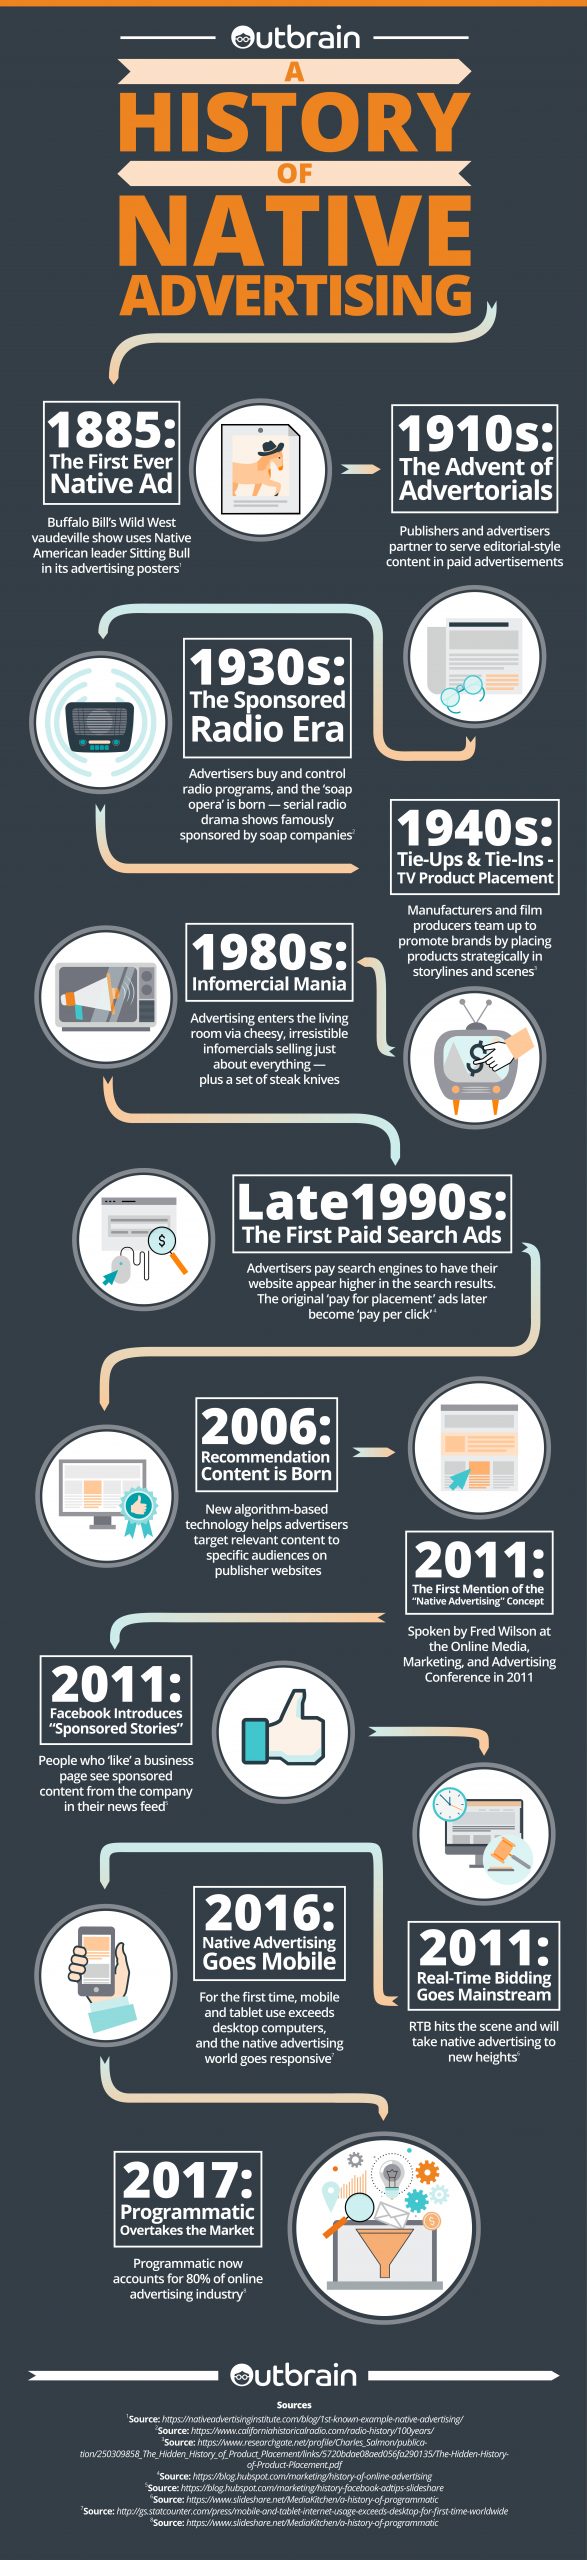 Infographic of Native Advertising history